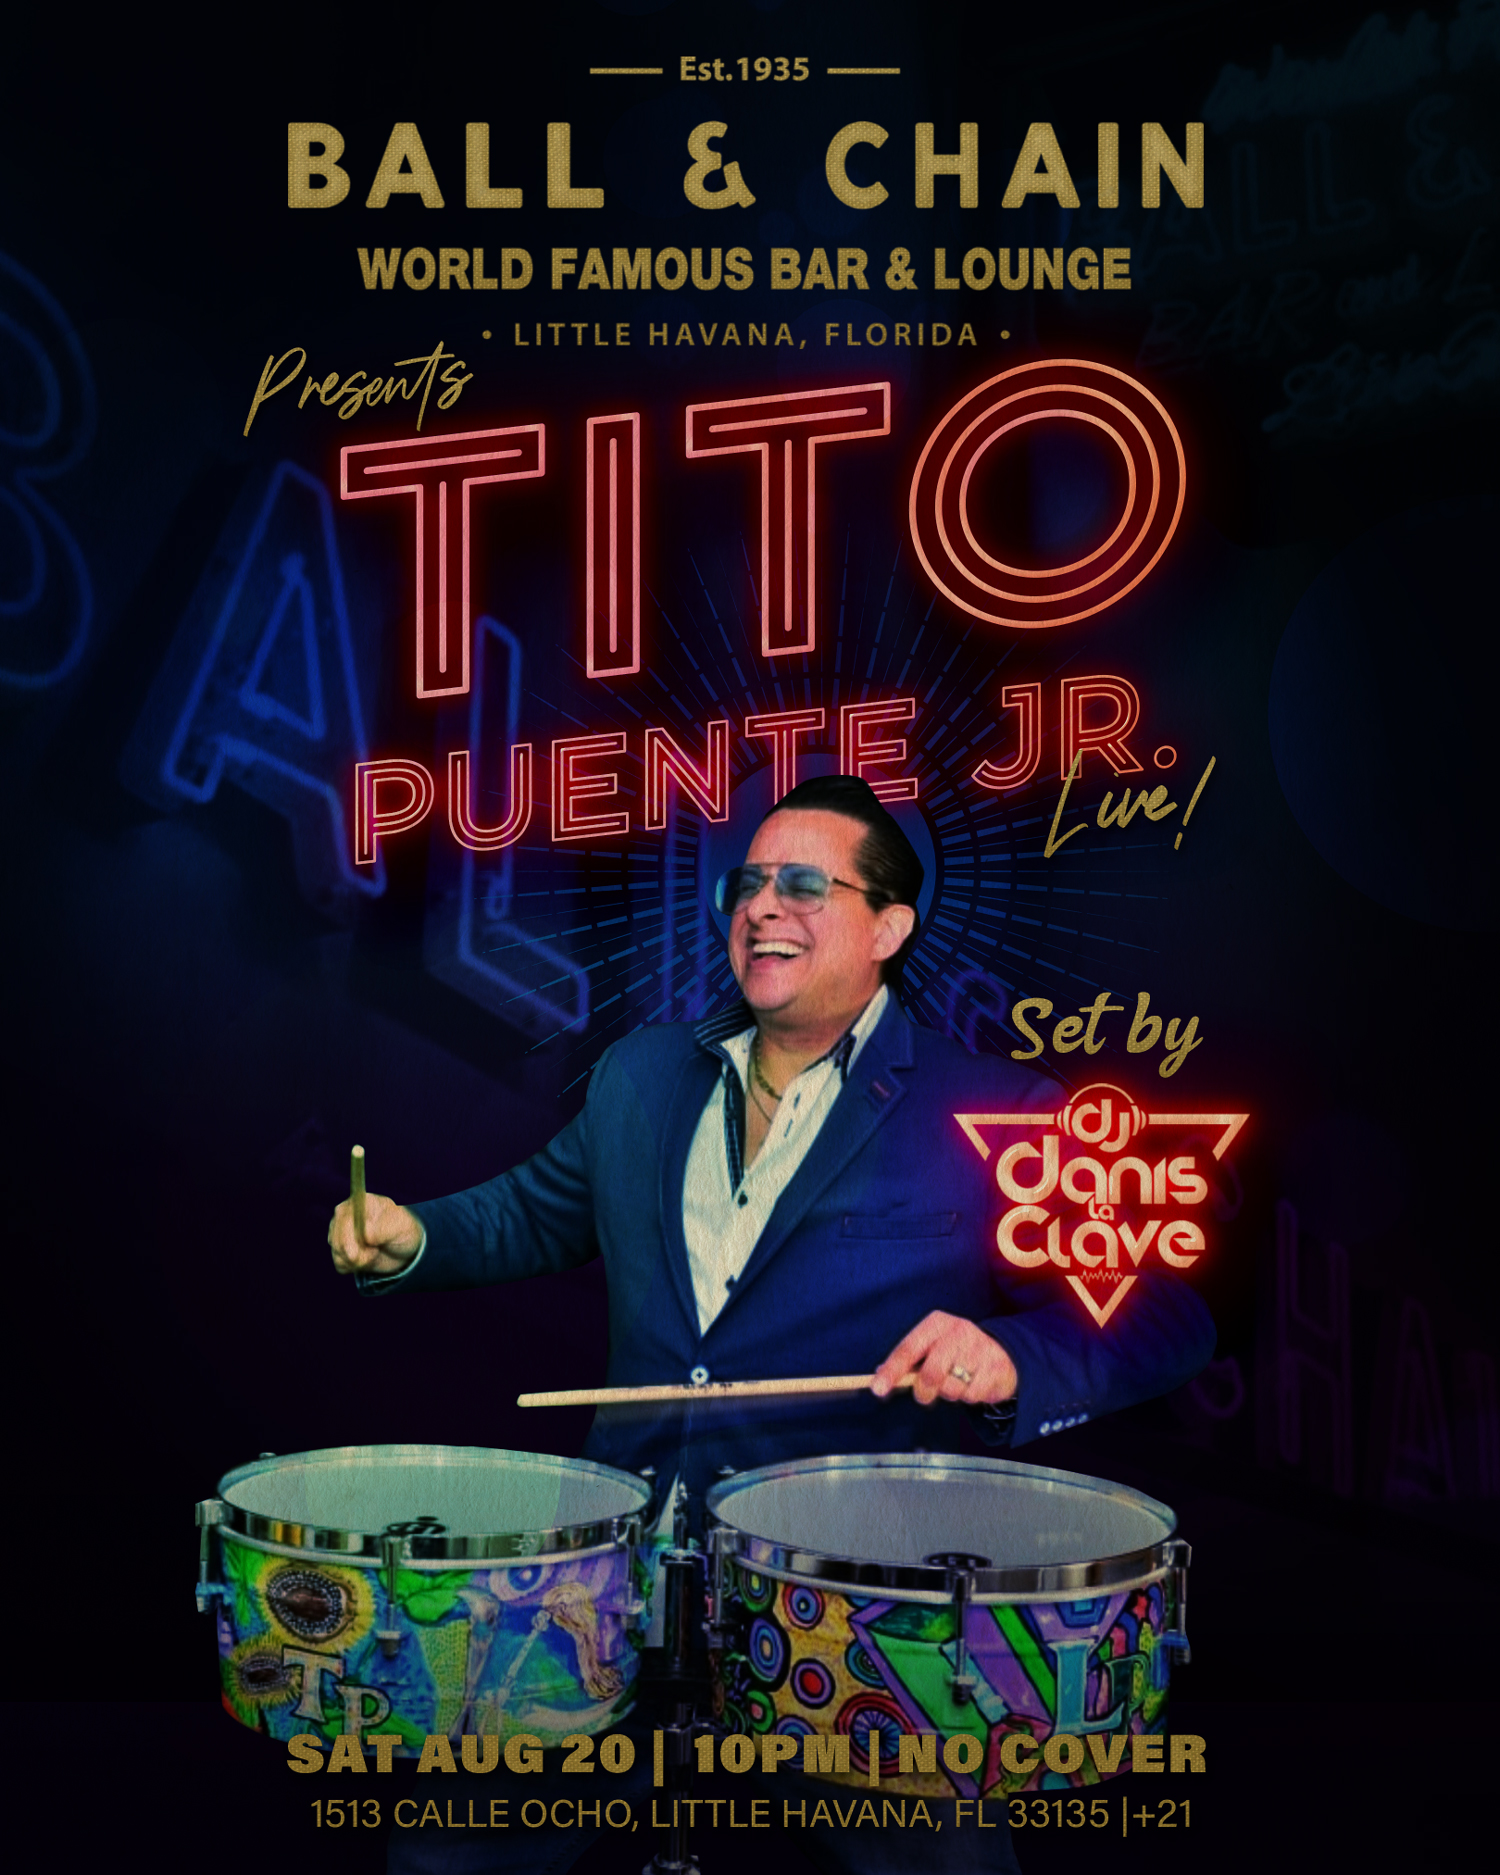 Tito Puente Jr. Playing the drums